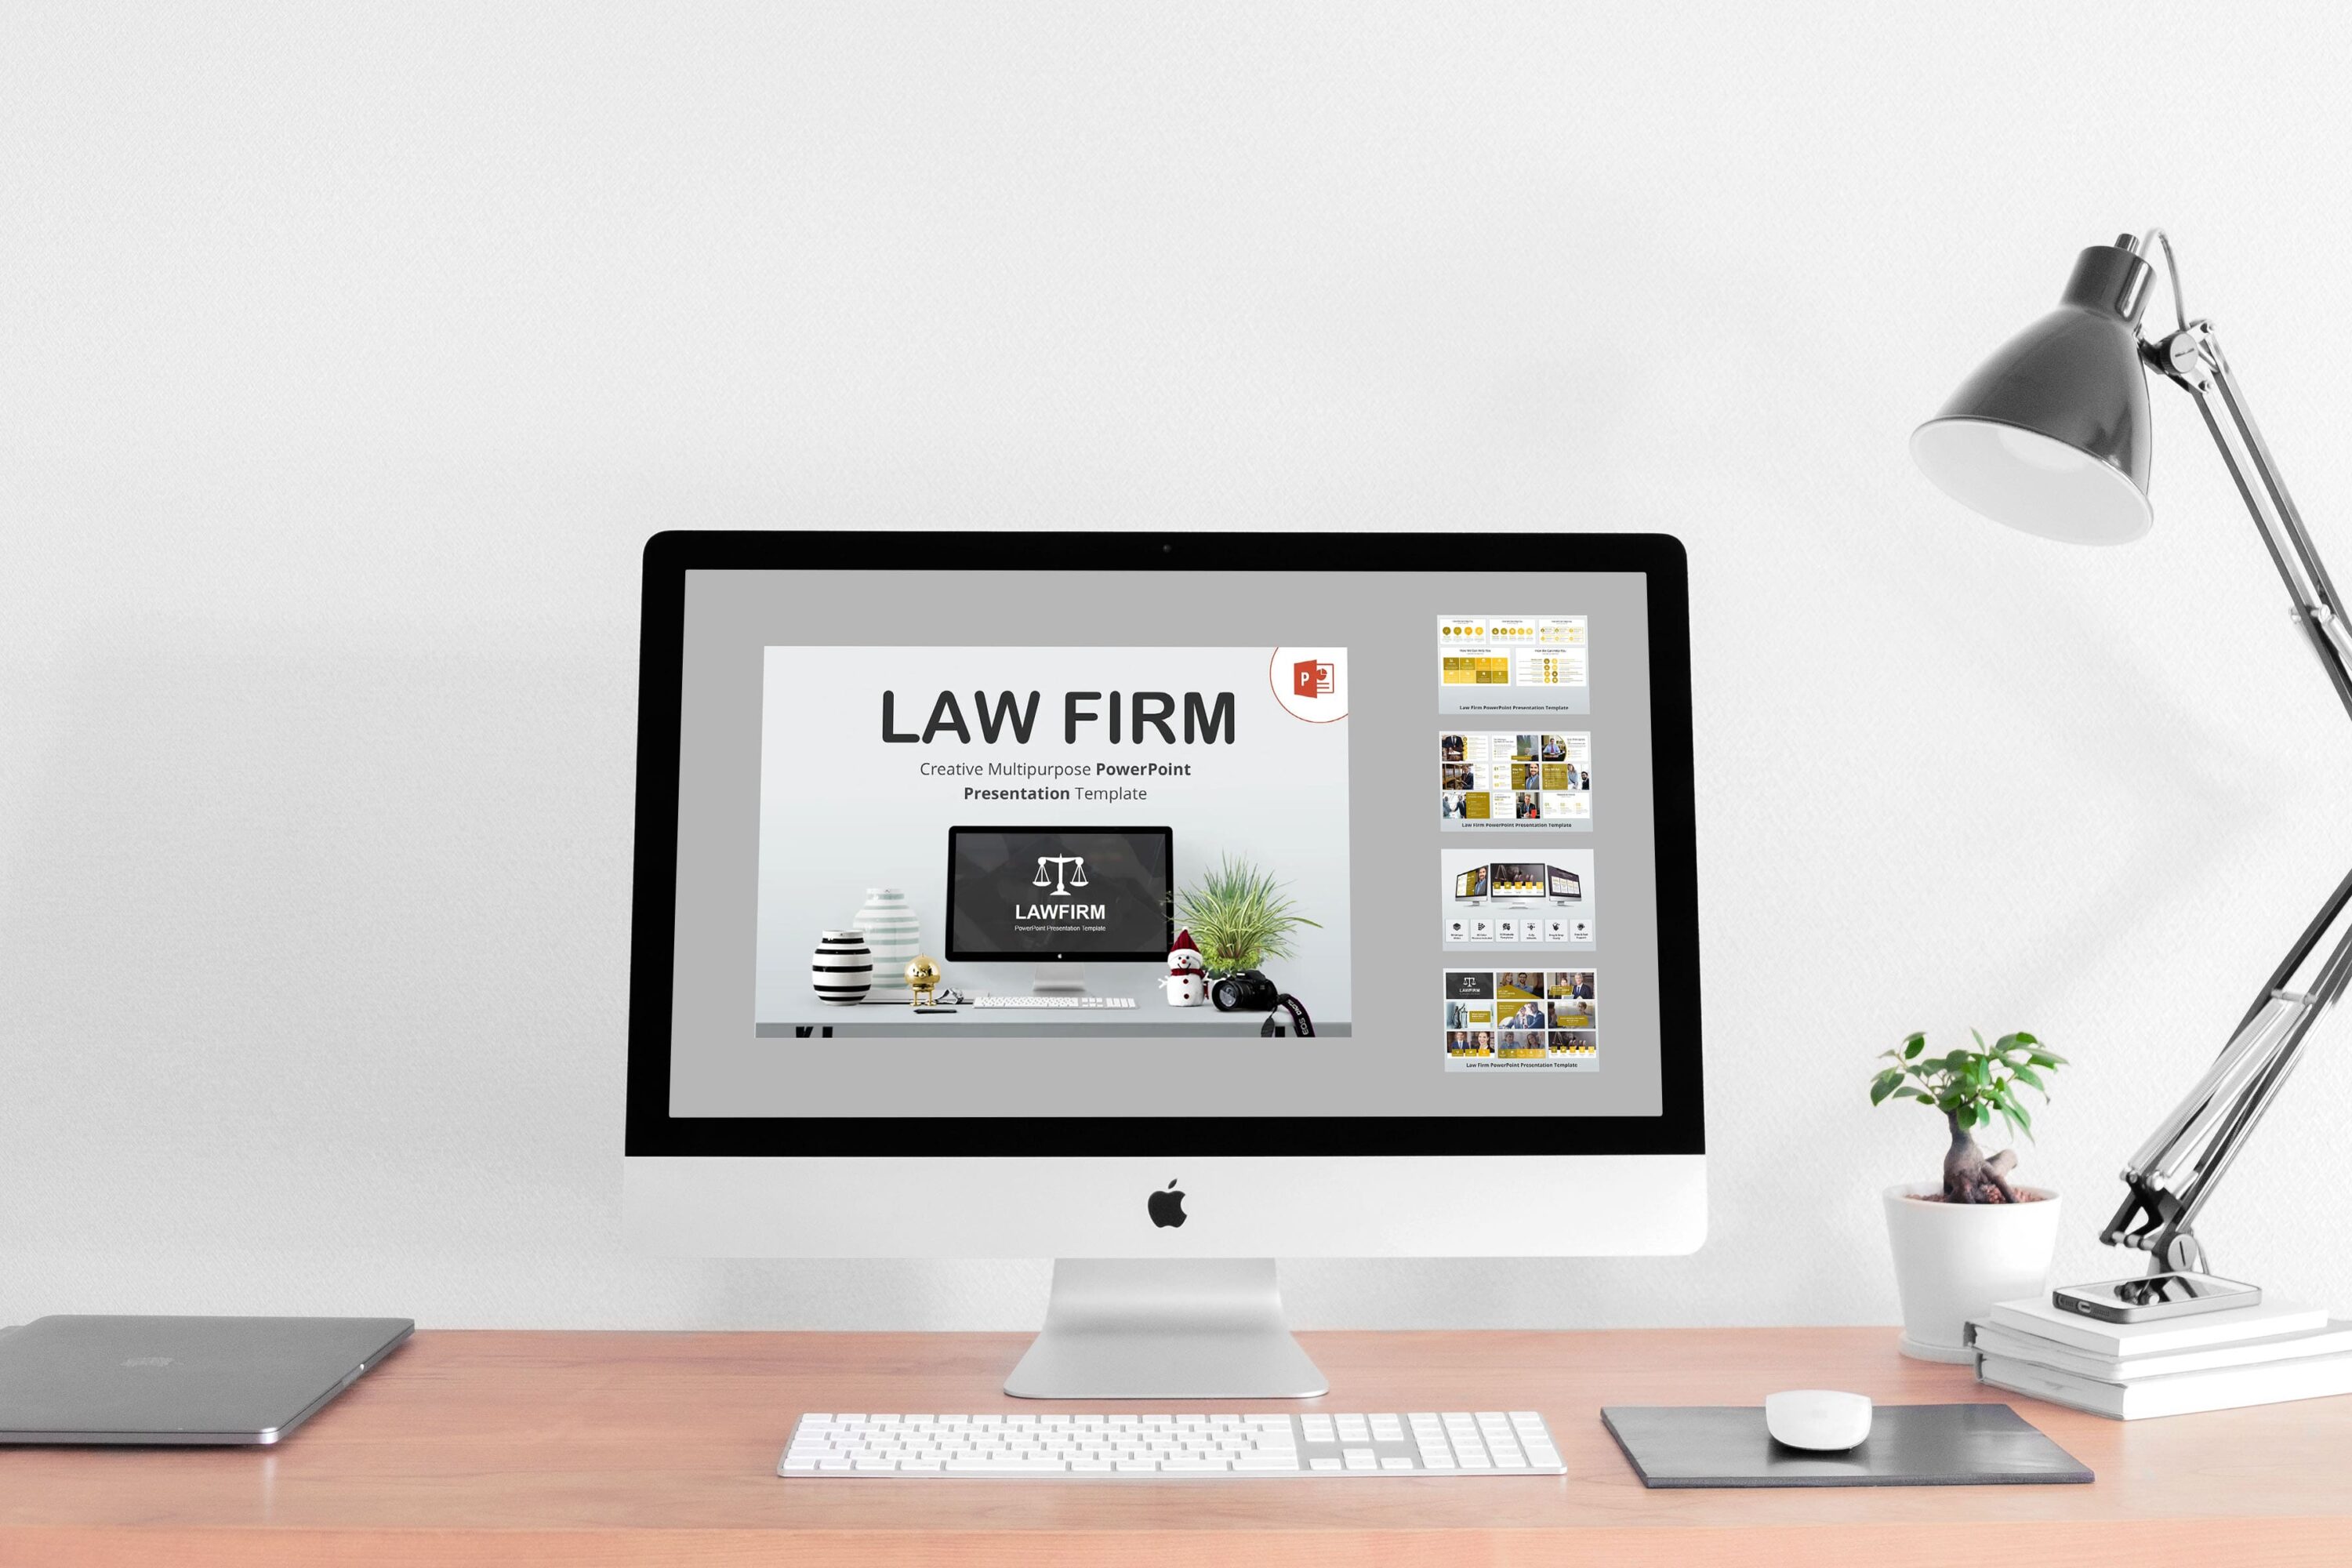 law firm powerpoint template mockup pc.